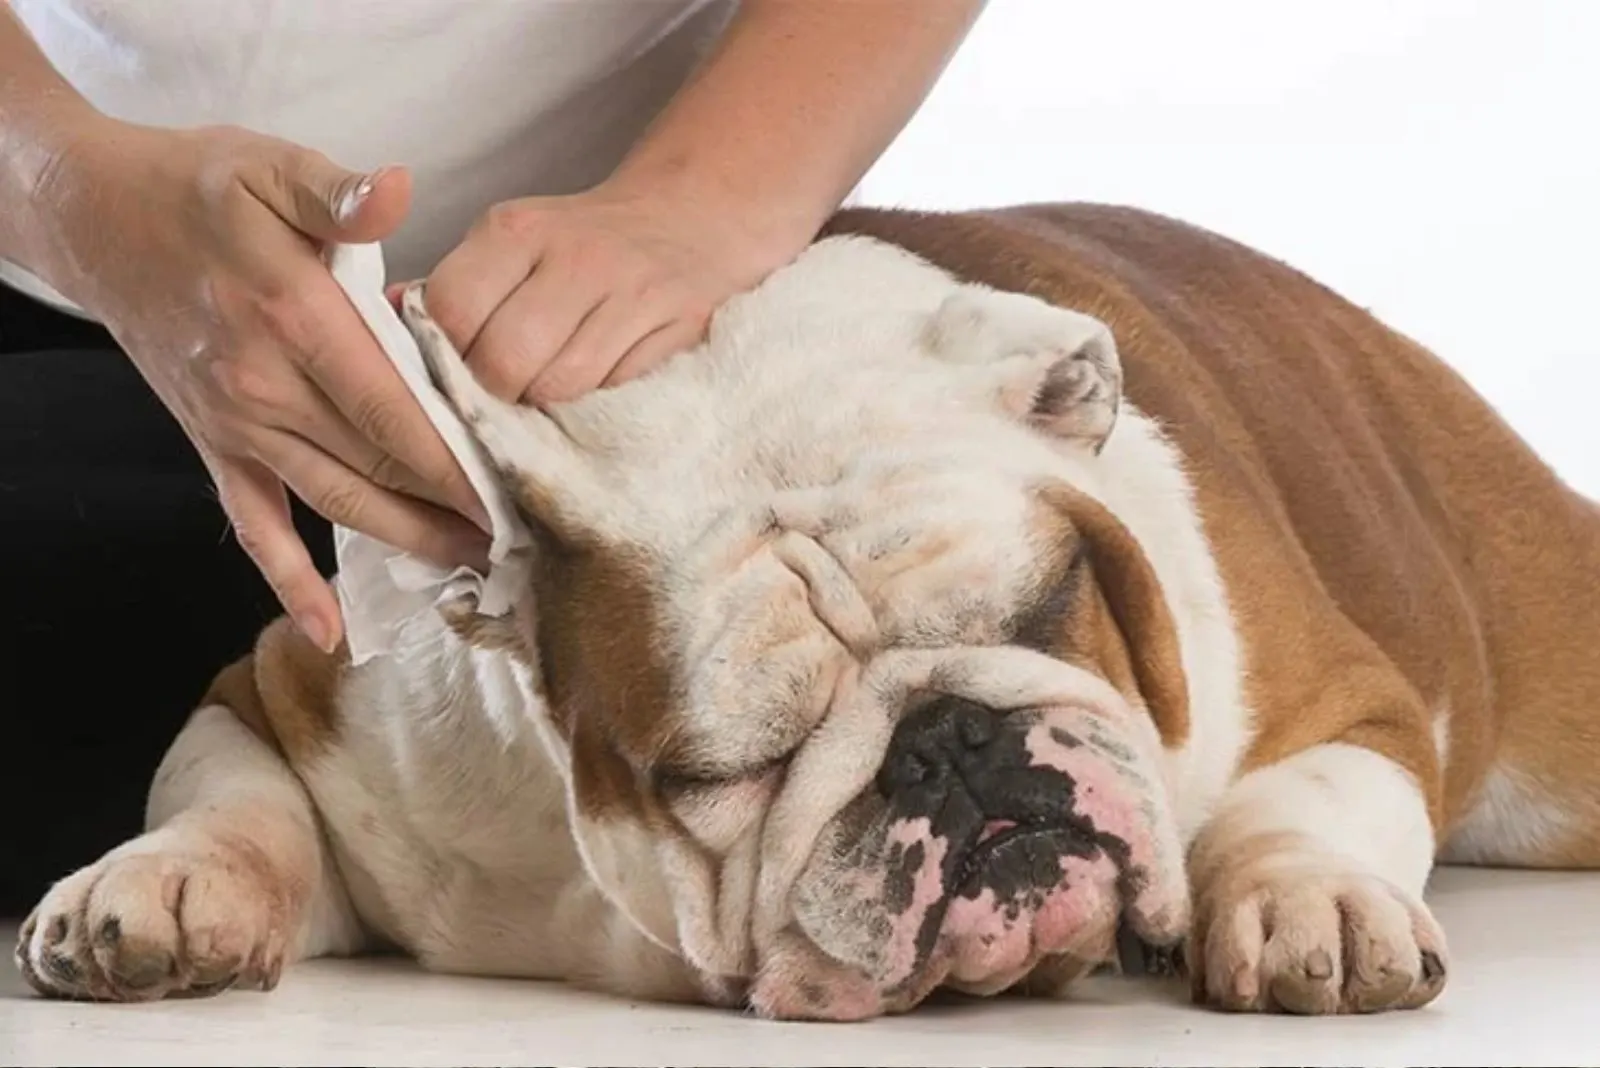 a close up of a person drying the dog's ears 